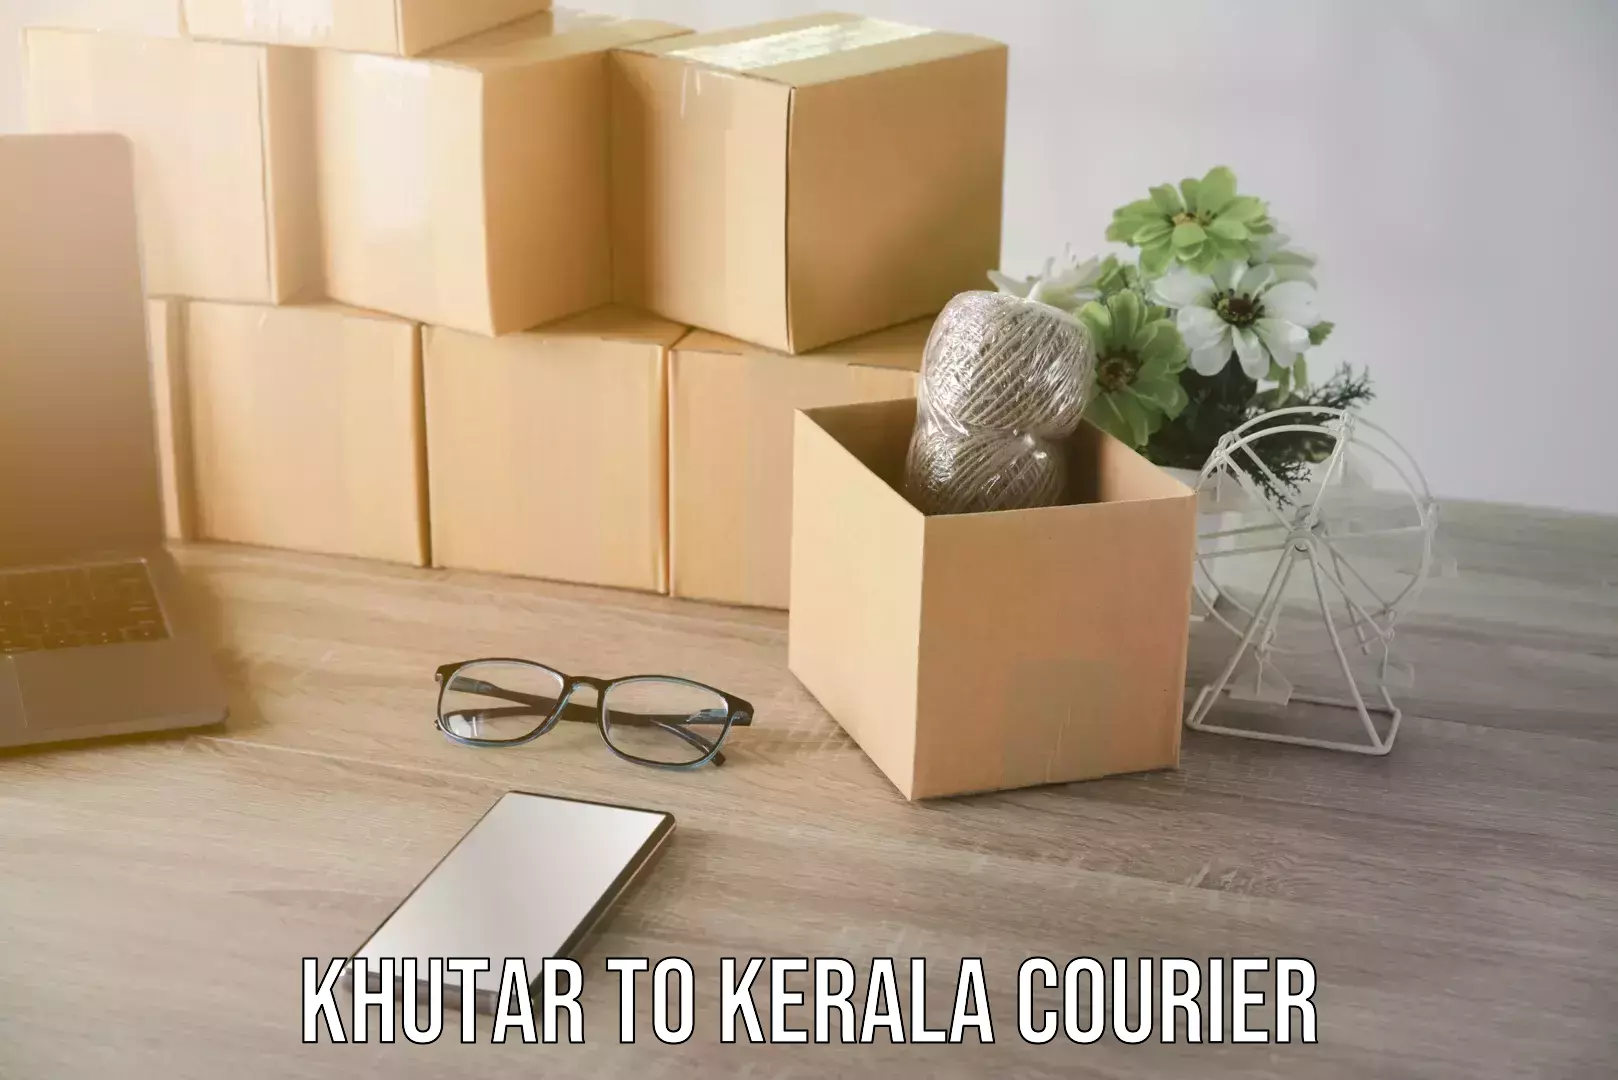 Reliable furniture movers Khutar to Kerala